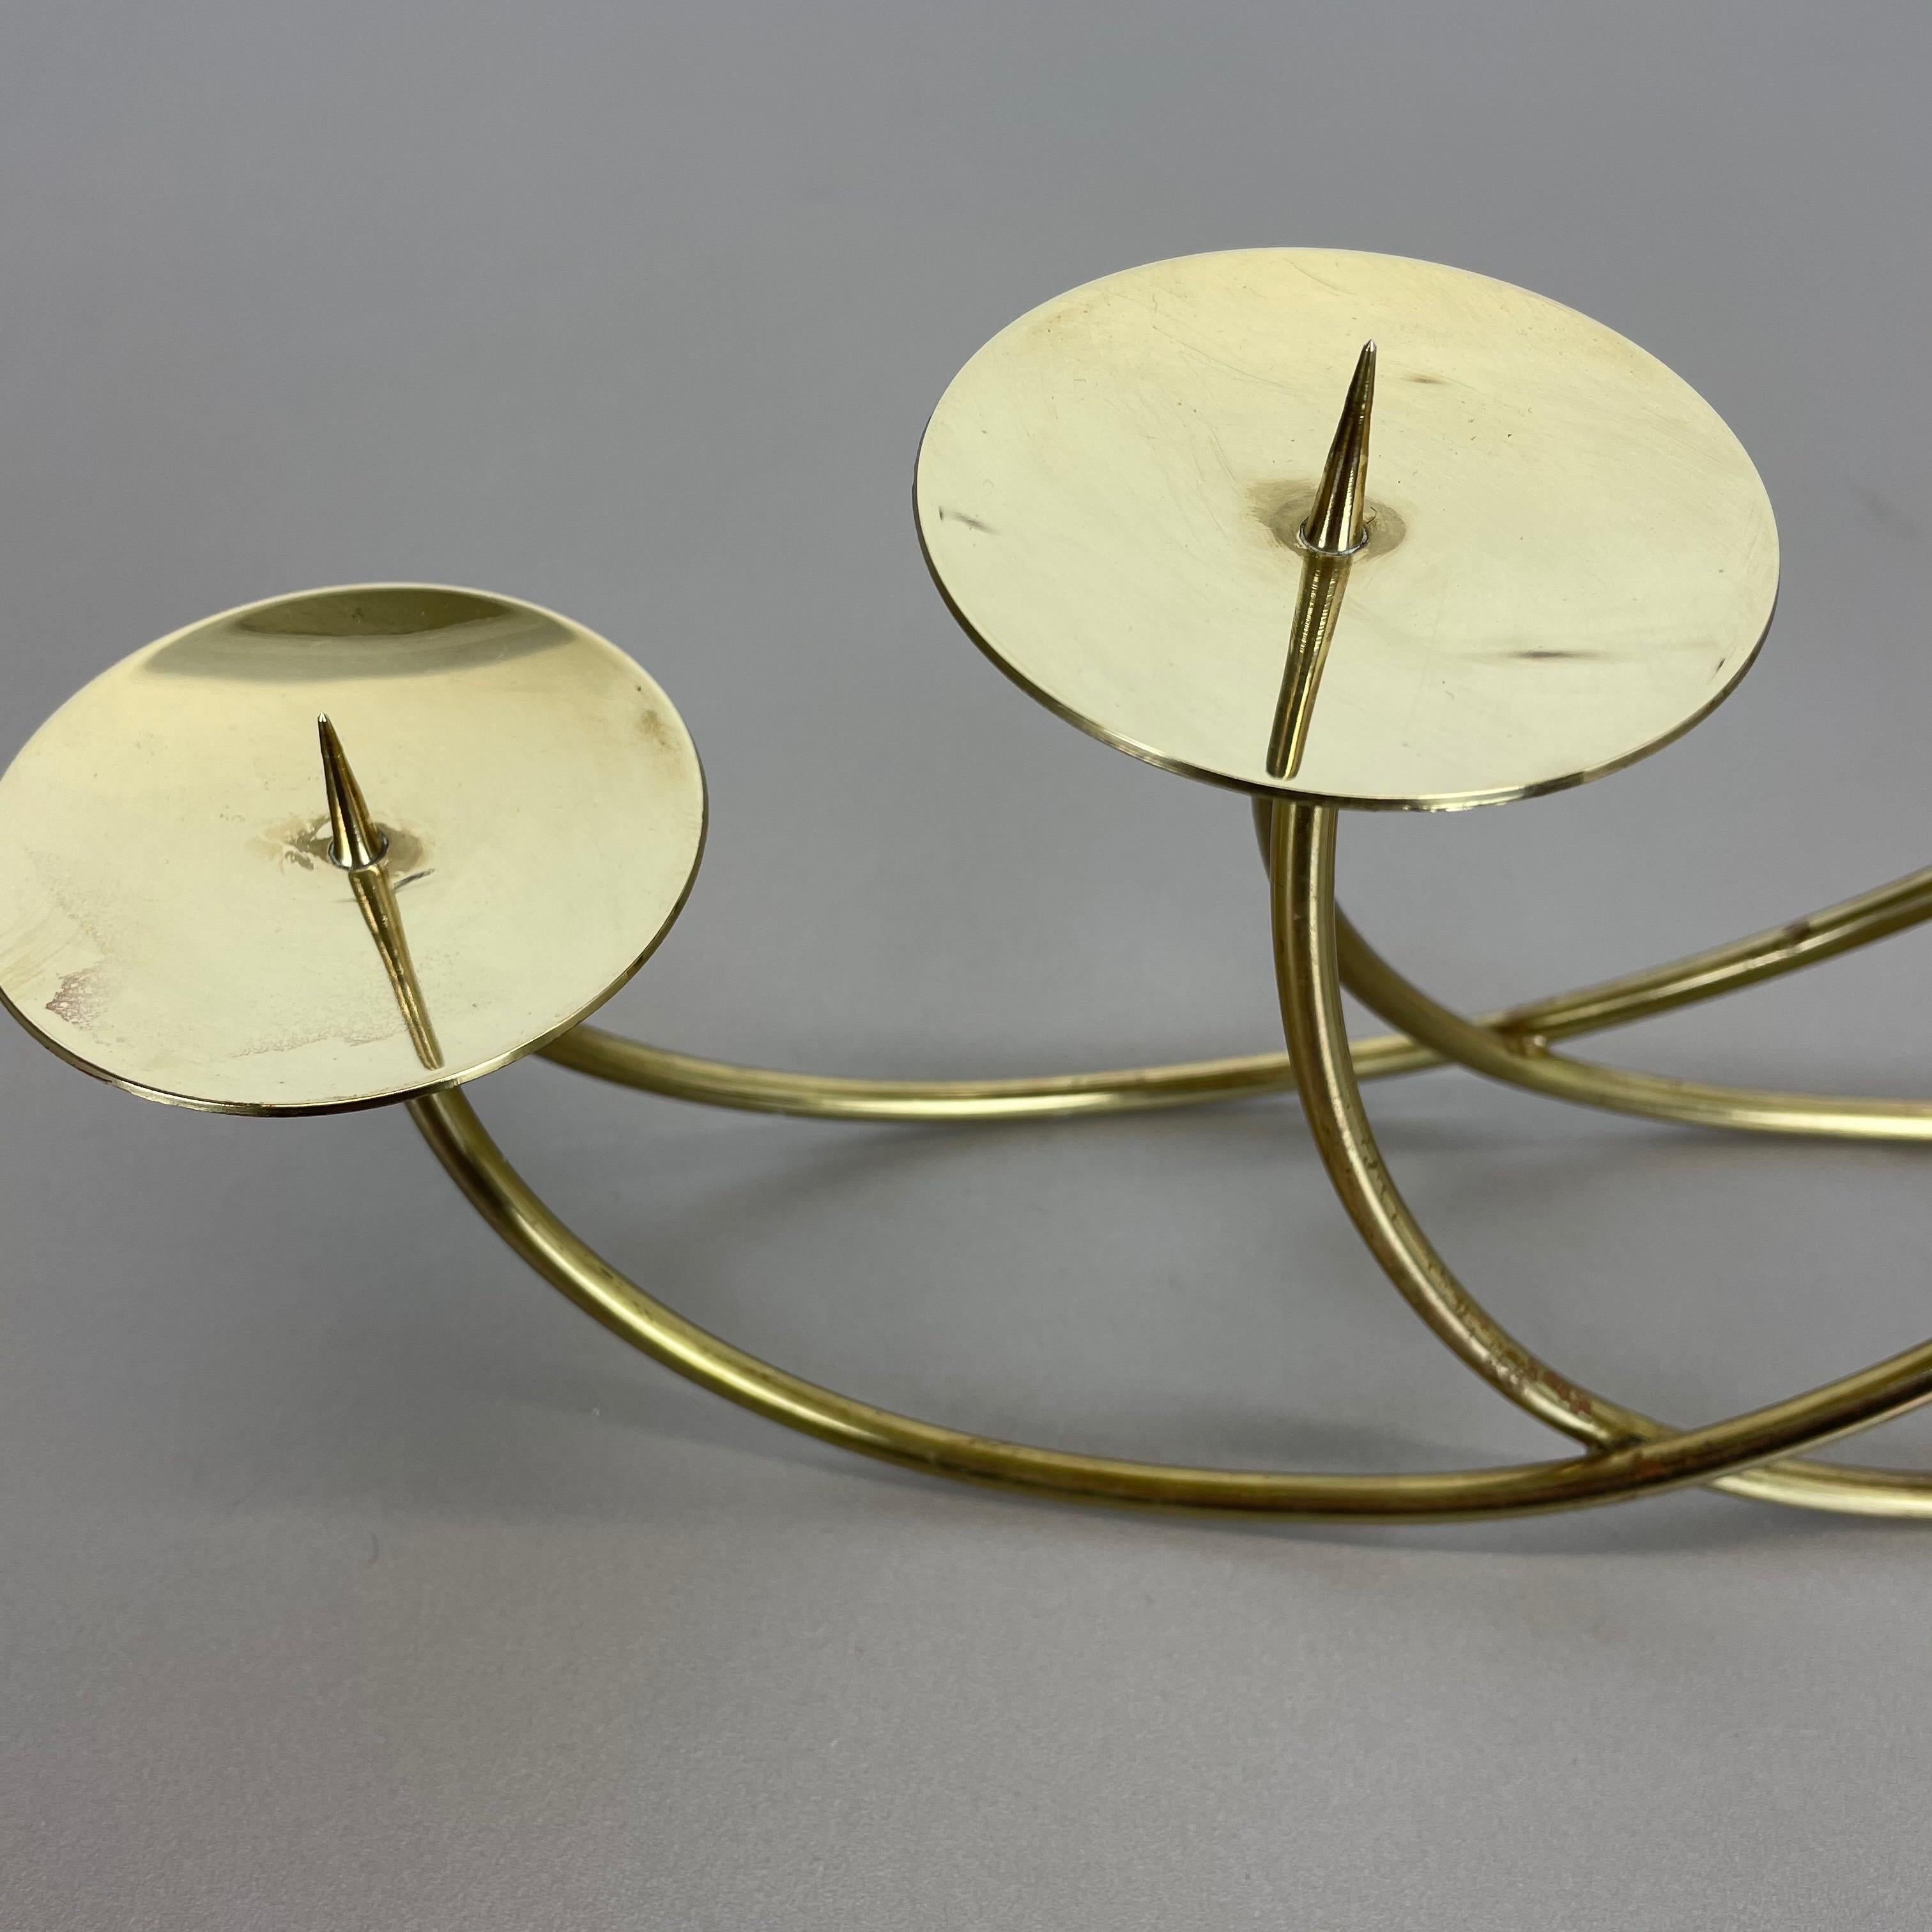 Sculptural Solid Brass Candleholder by Harald Buchrucker Bauhaus, Germany, 1950s For Sale 4